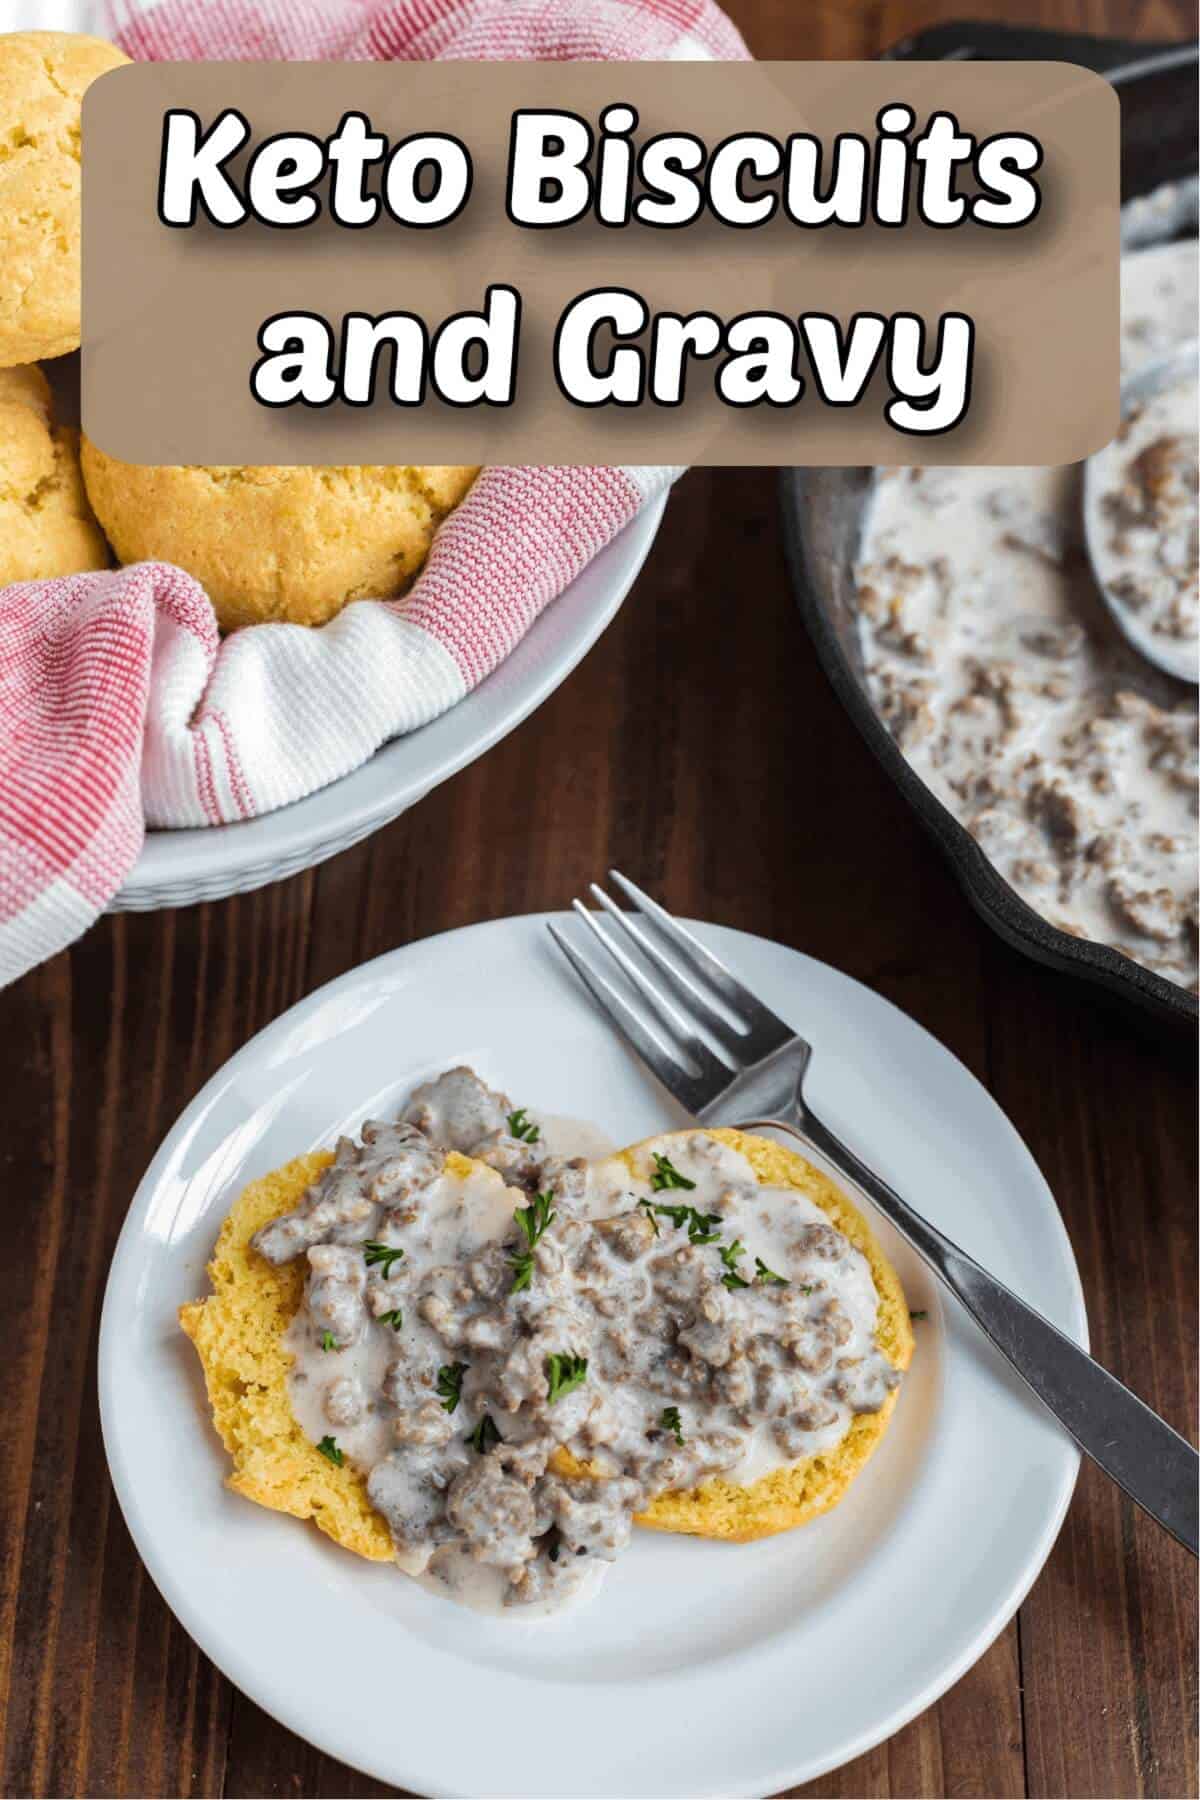 keto biscuits and gravy recipe cover image